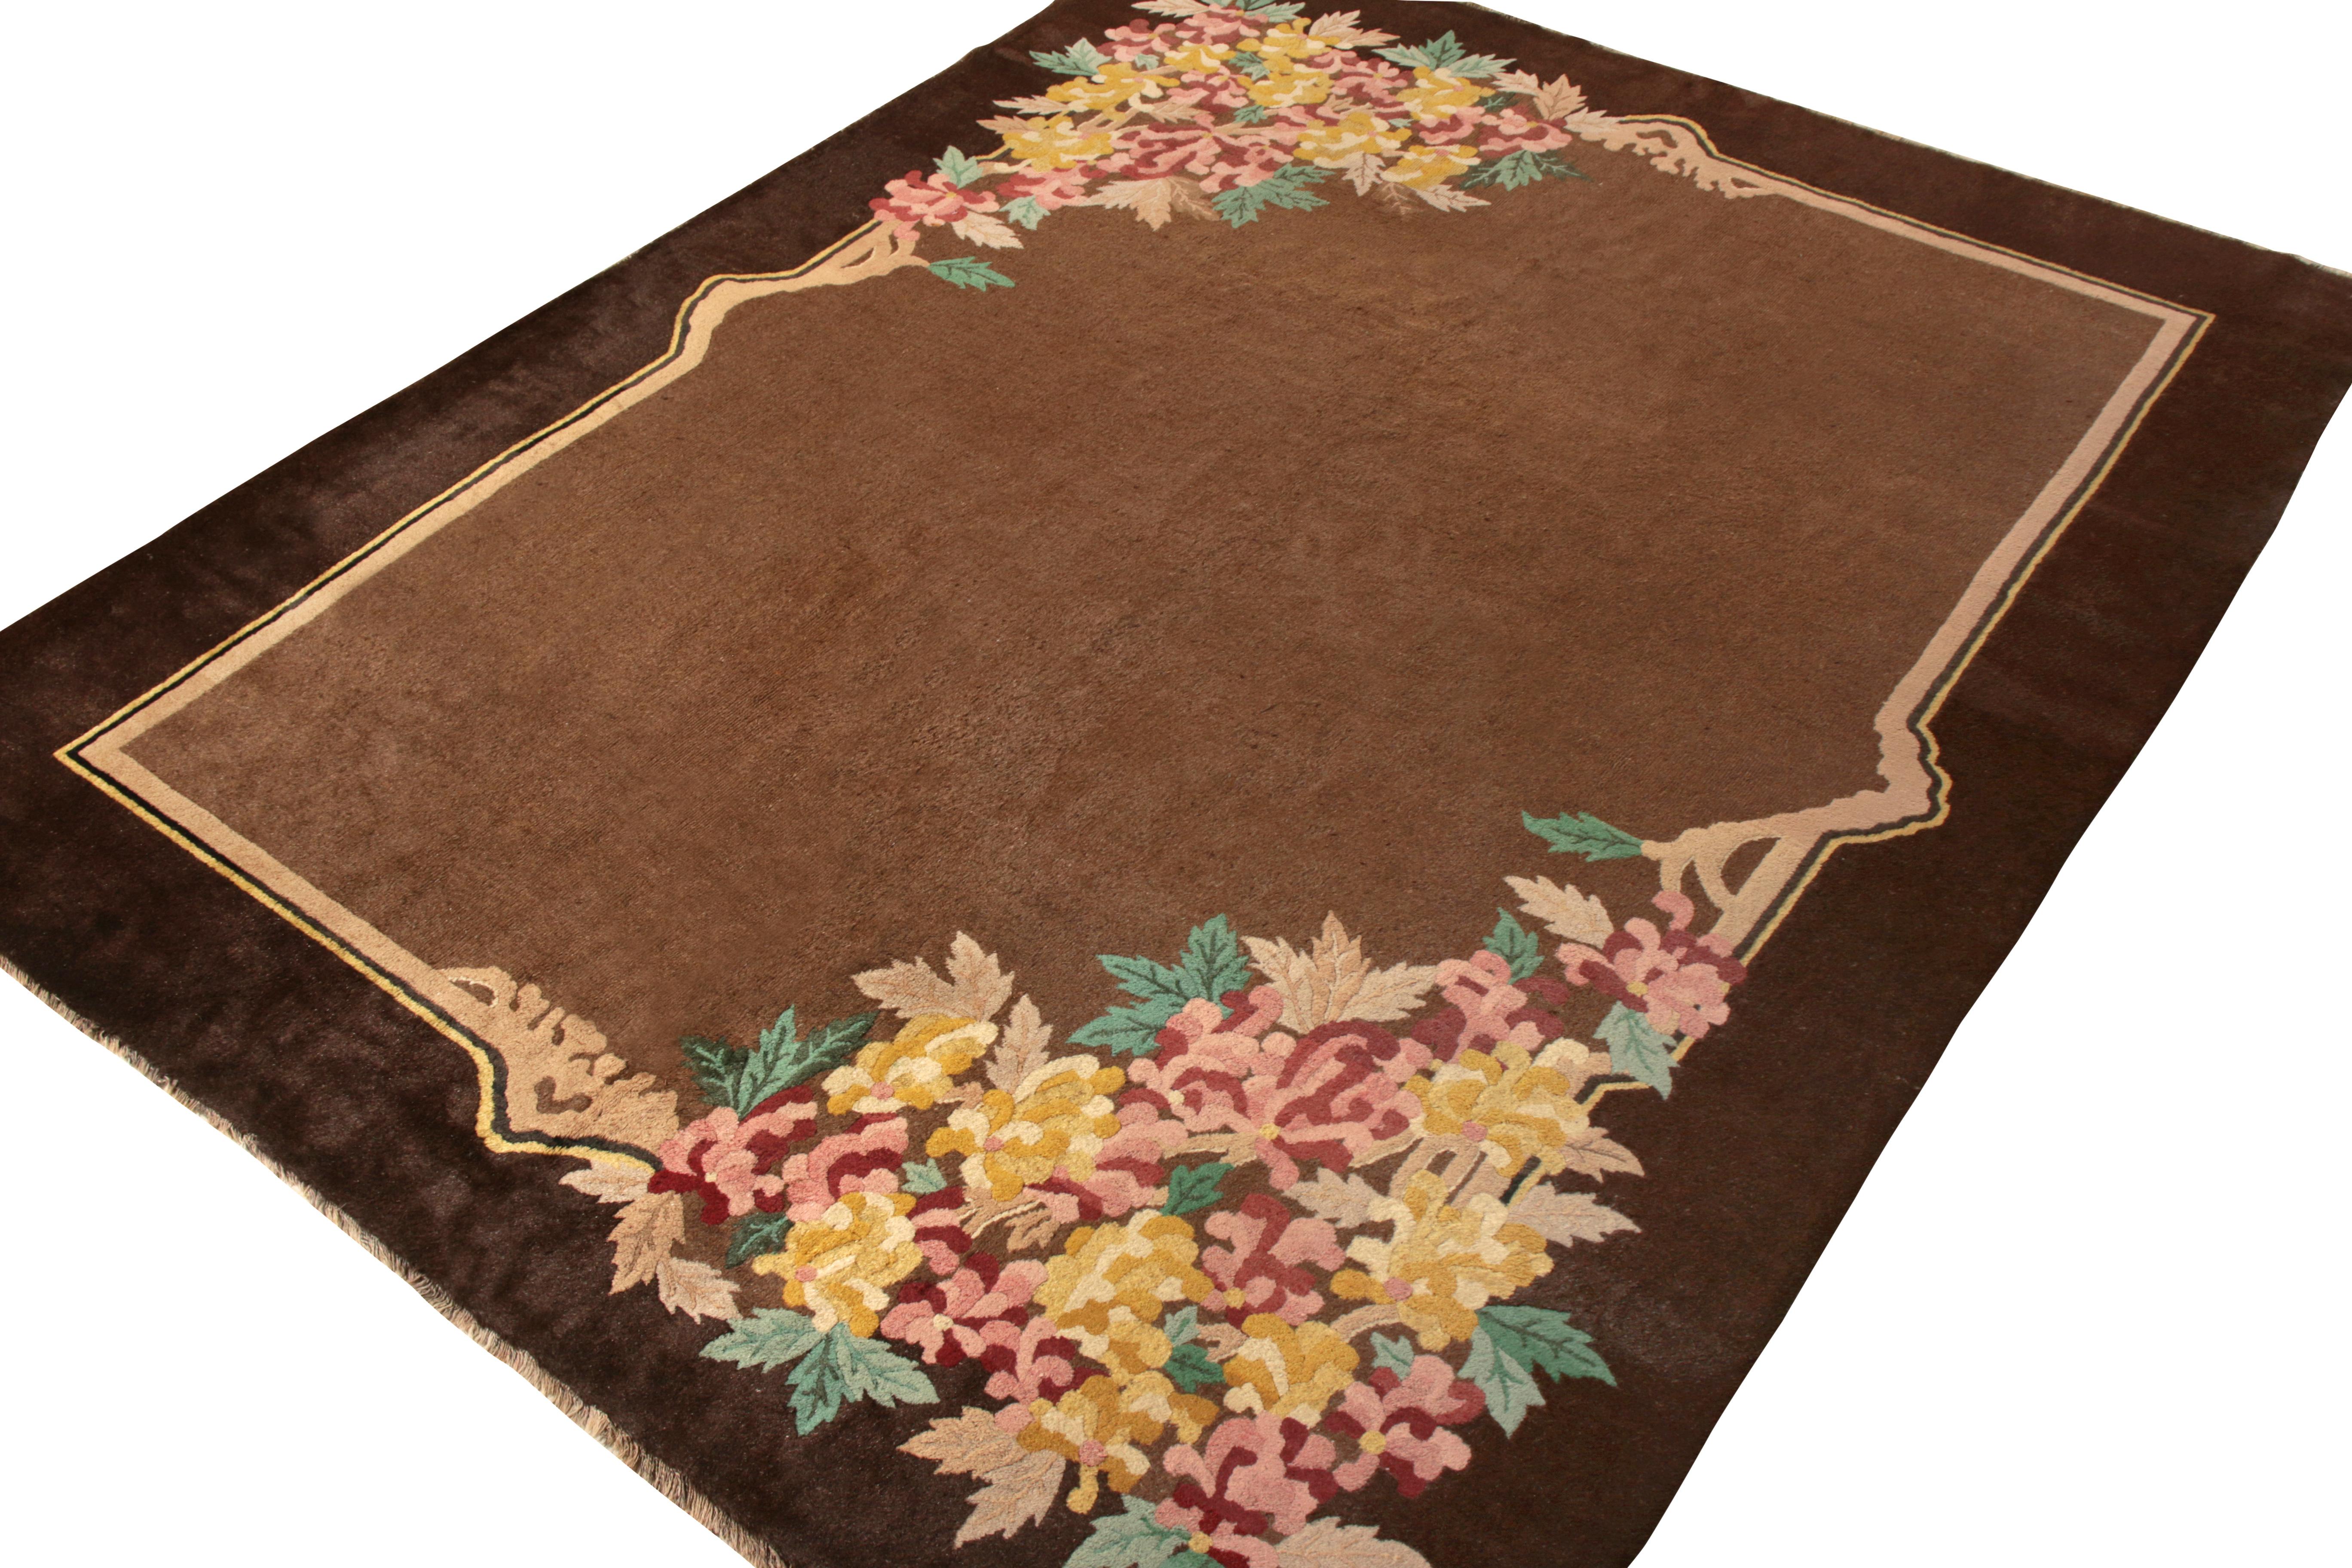 Kilim Handspun Antique Chinese Art Deco Rug in Beige-Brown and Pink Floral Patterns